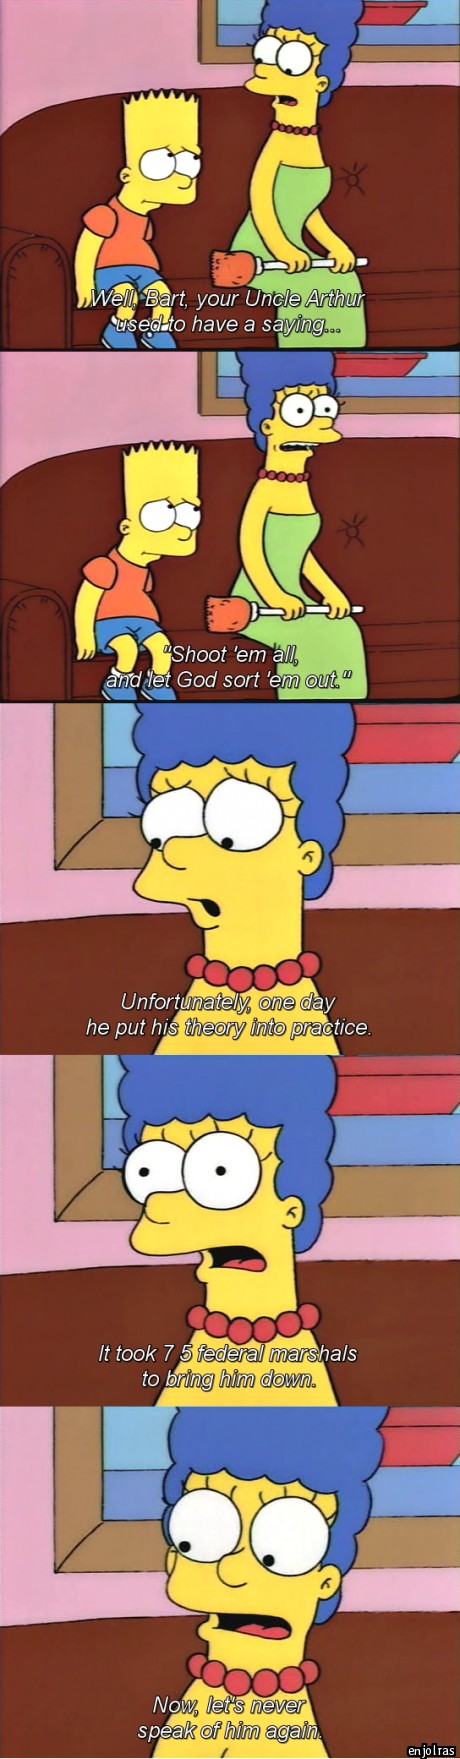 Simpsons are Historic.